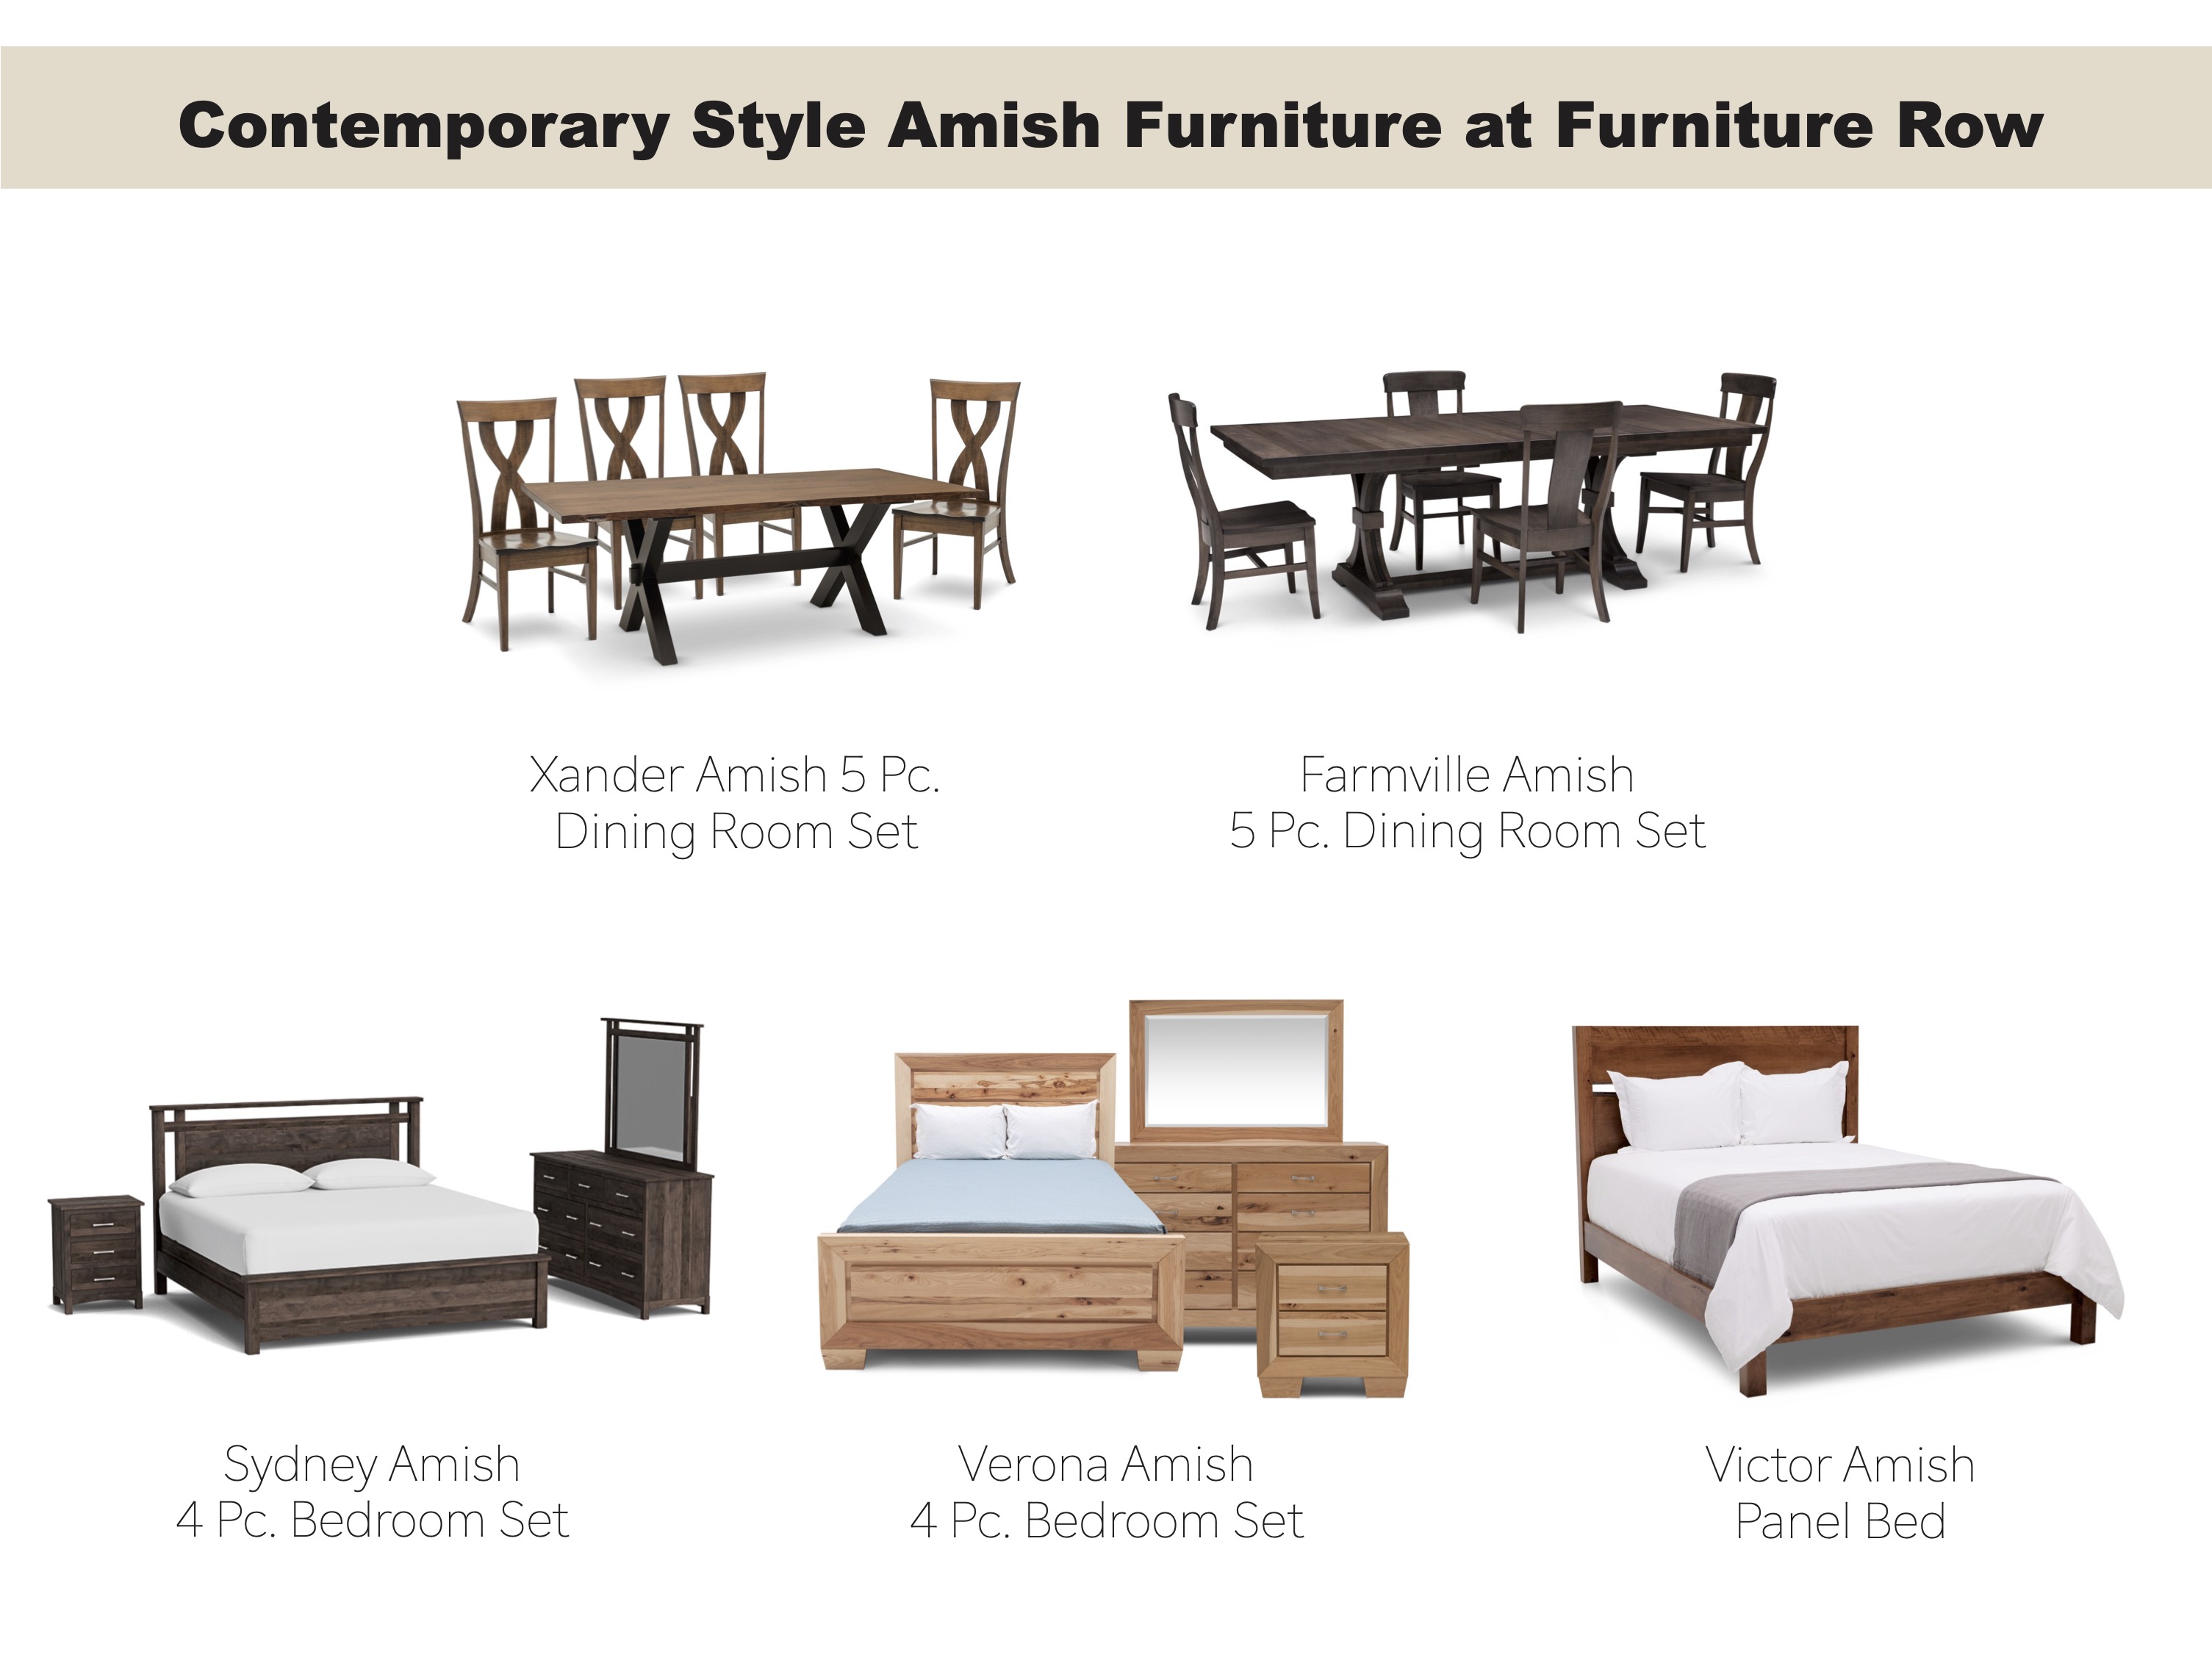 Contemporary Style Amish Furniture at Furniture Row